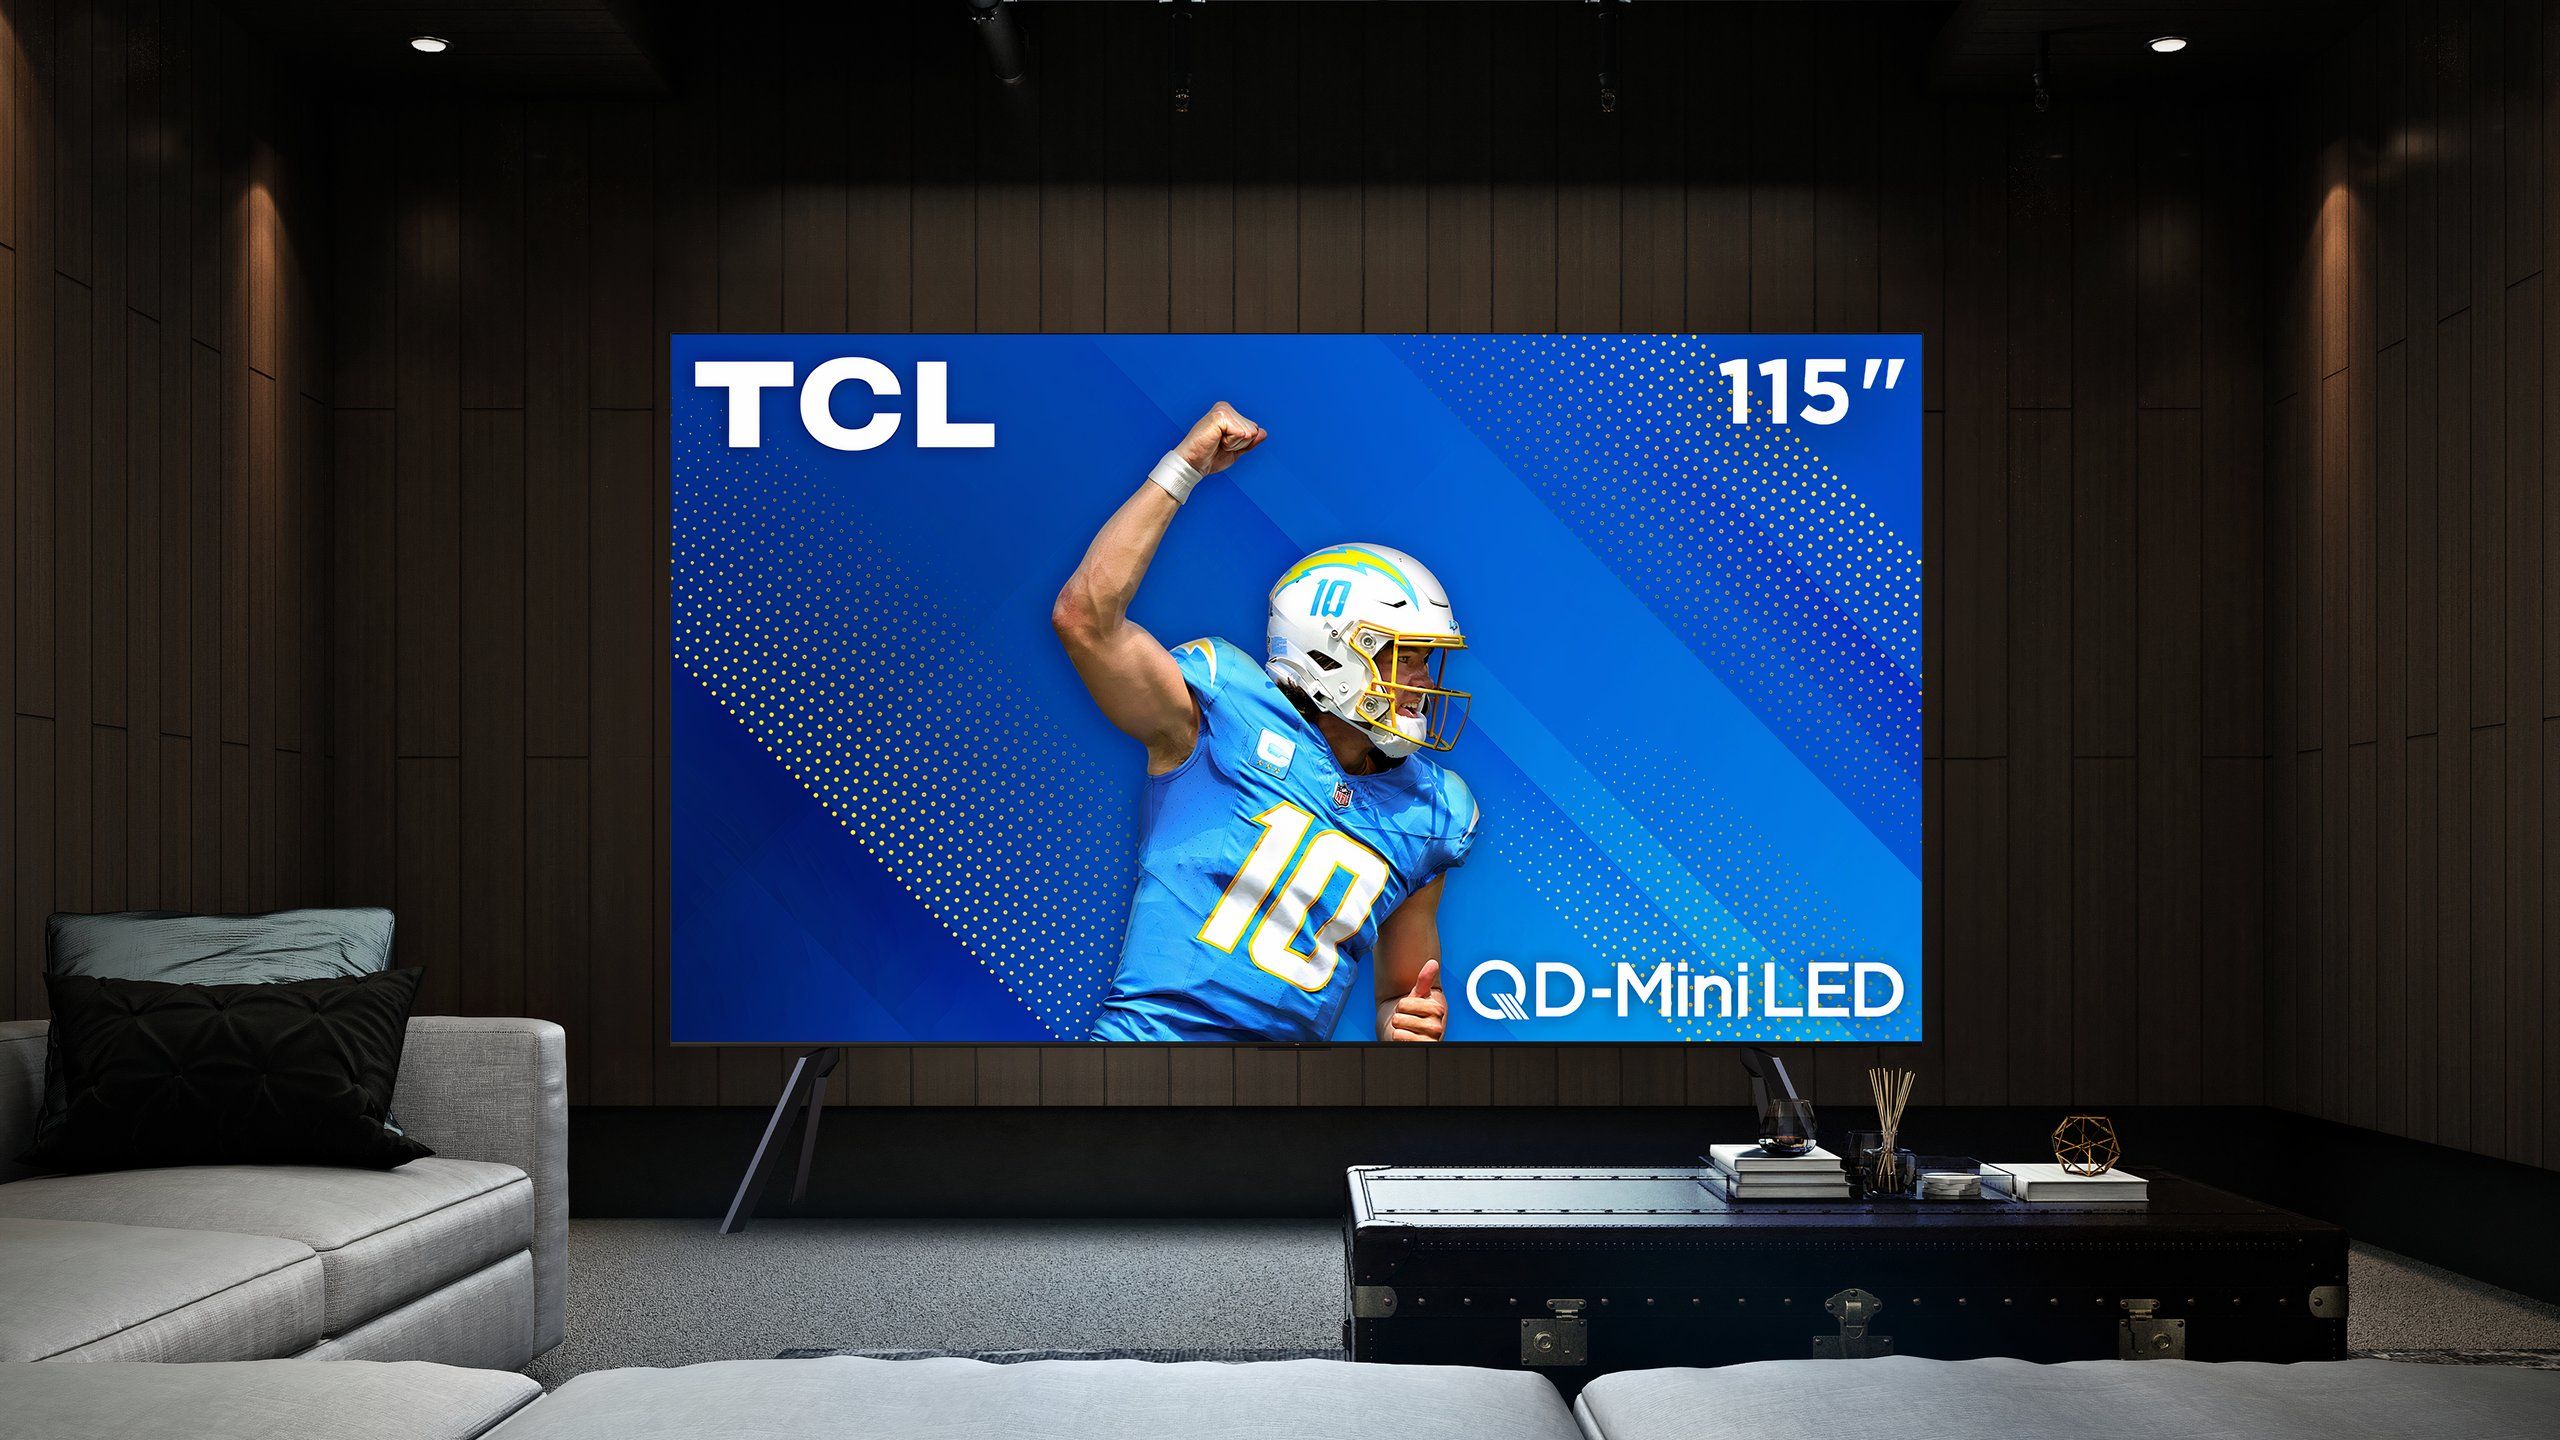 4 things to know about TCL’s bright and big new TVs